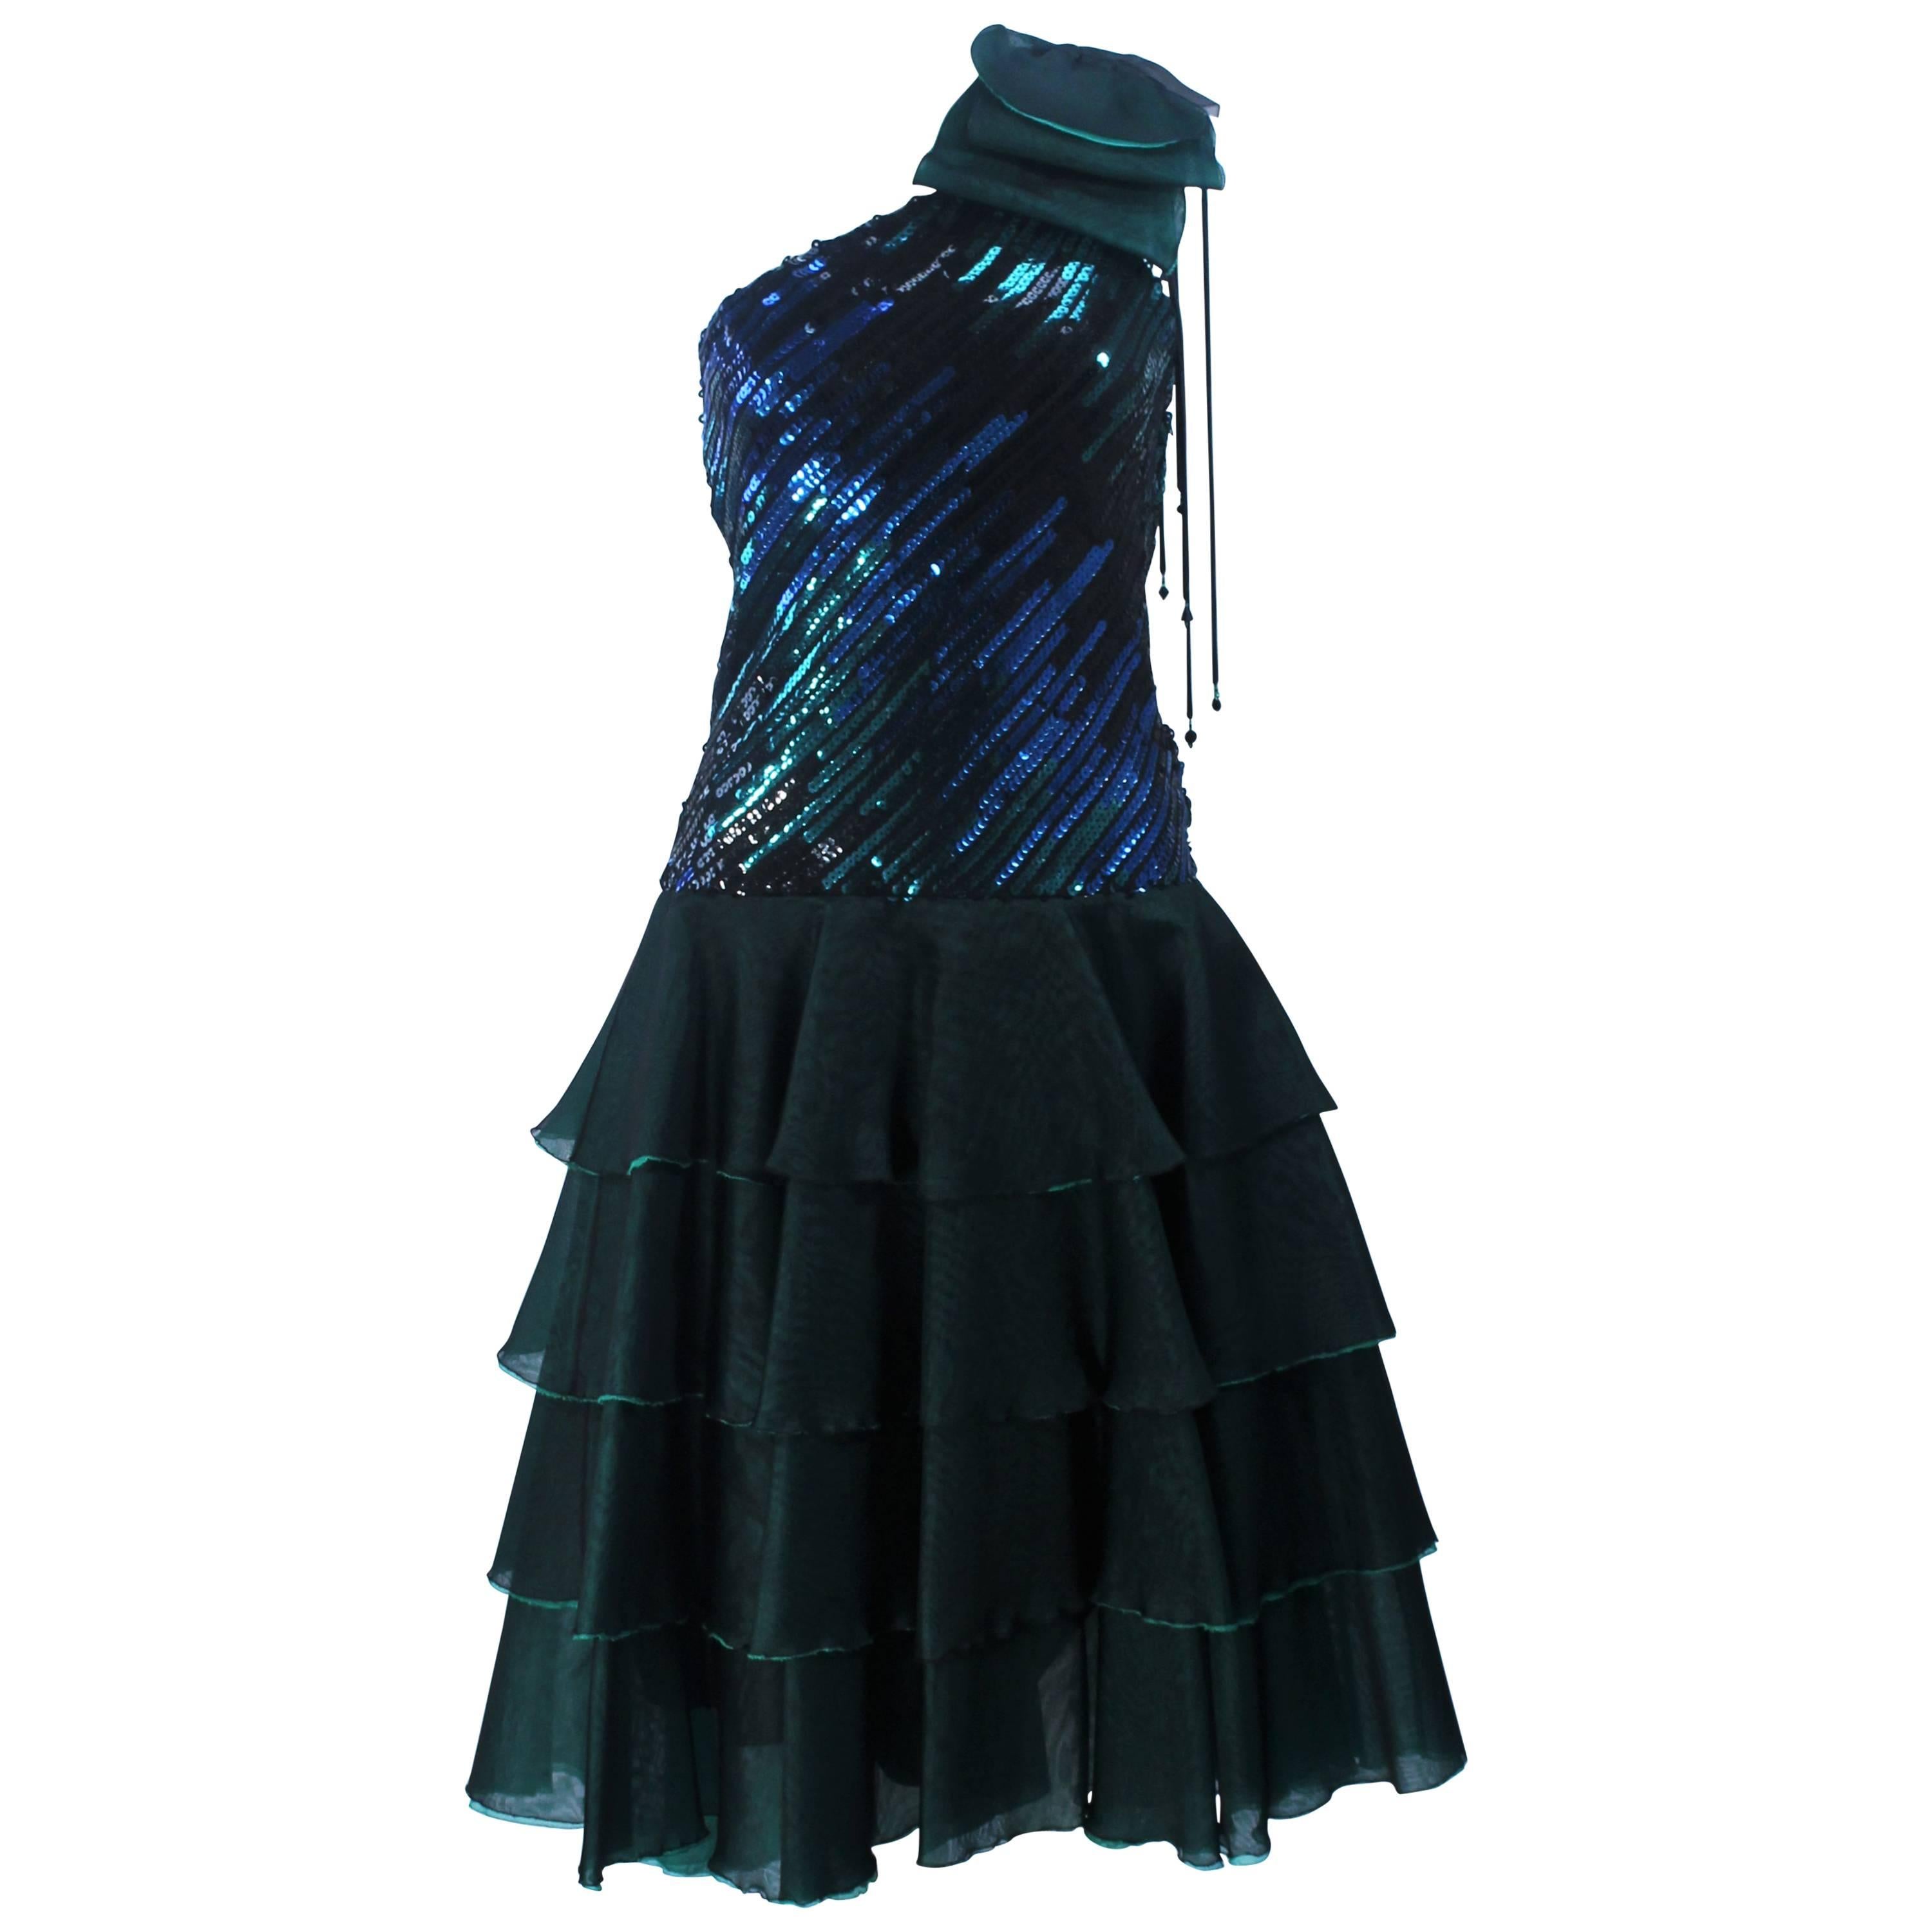 Iridescent Emerald Green Sequin Cocktail Dress Size 6-8 For Sale